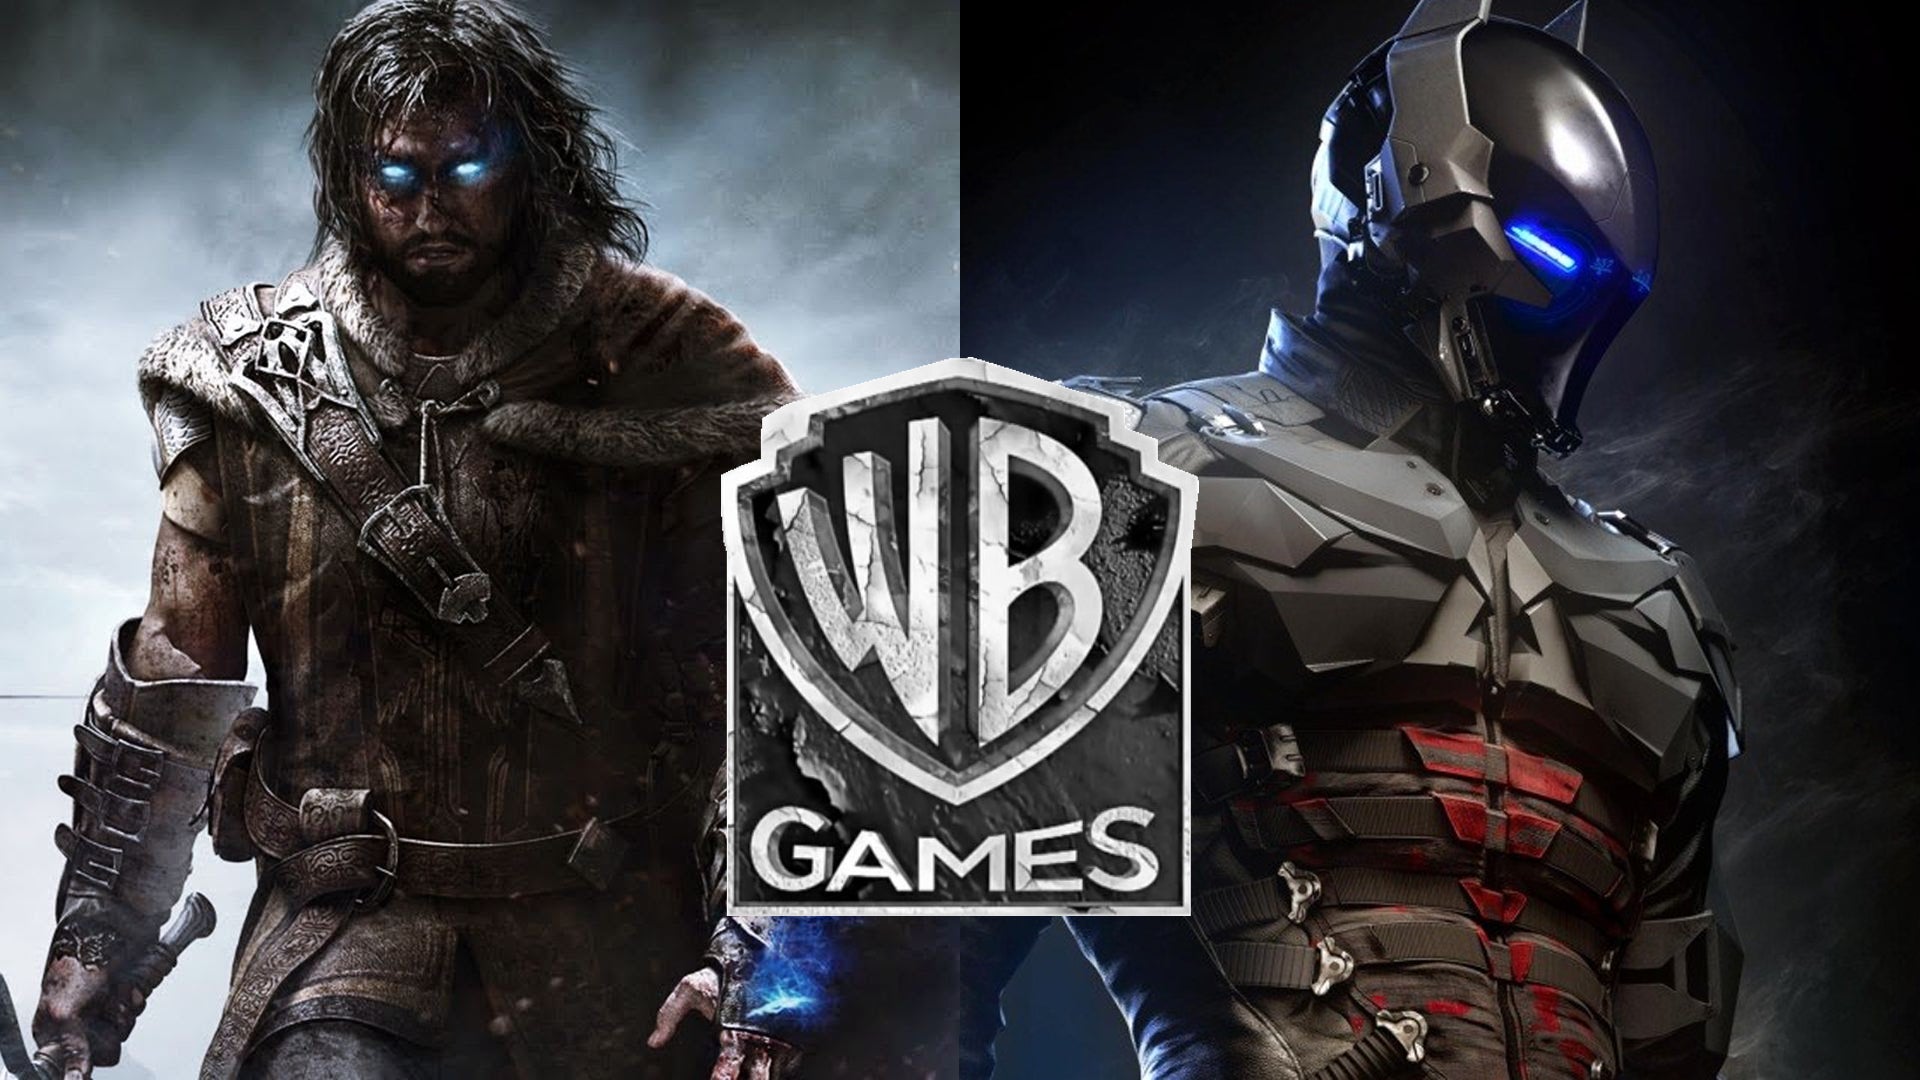 Image for Microsoft is interested in acquiring Warner Bros Interactive Entertainment